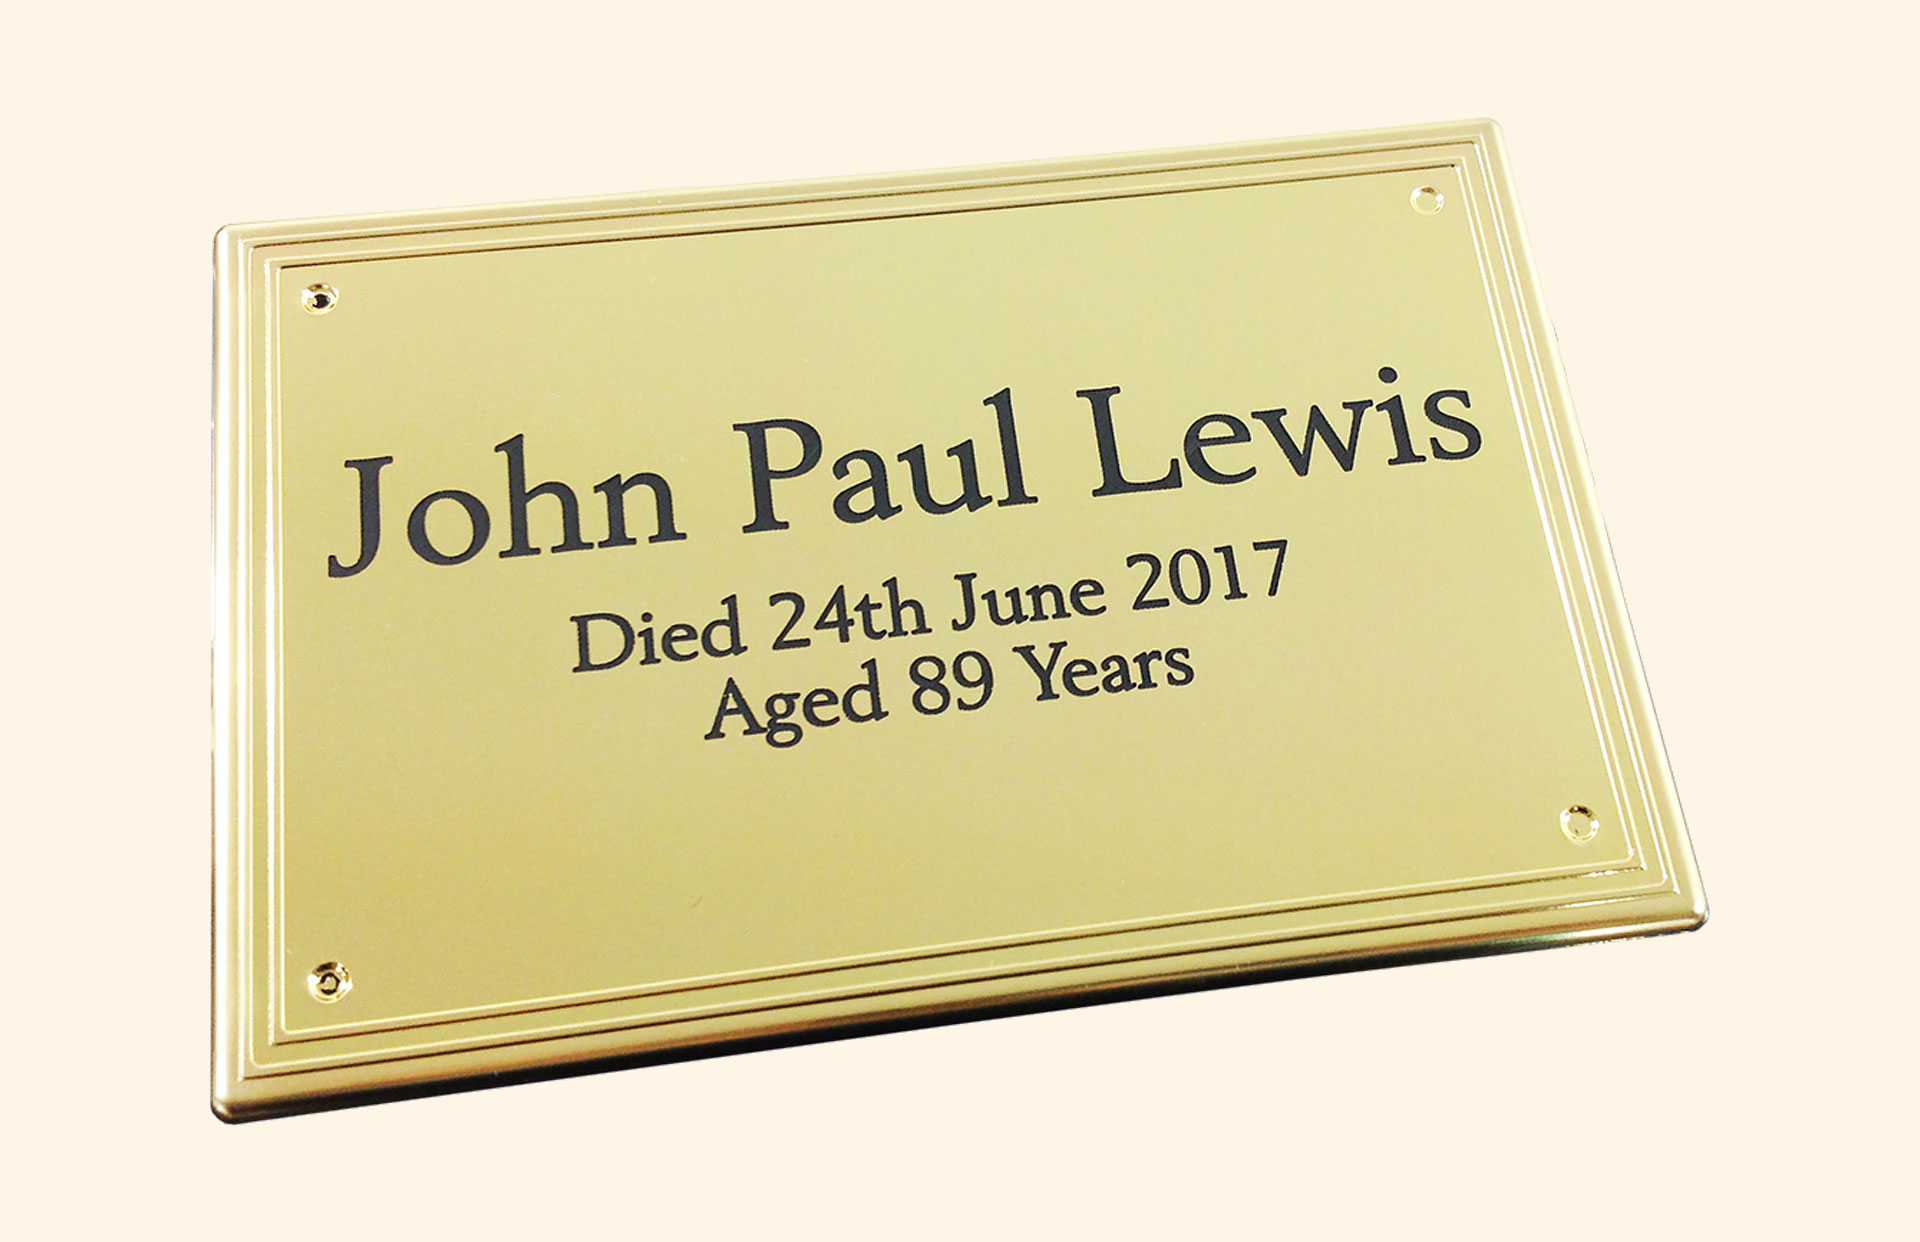 Gold engraved plate included